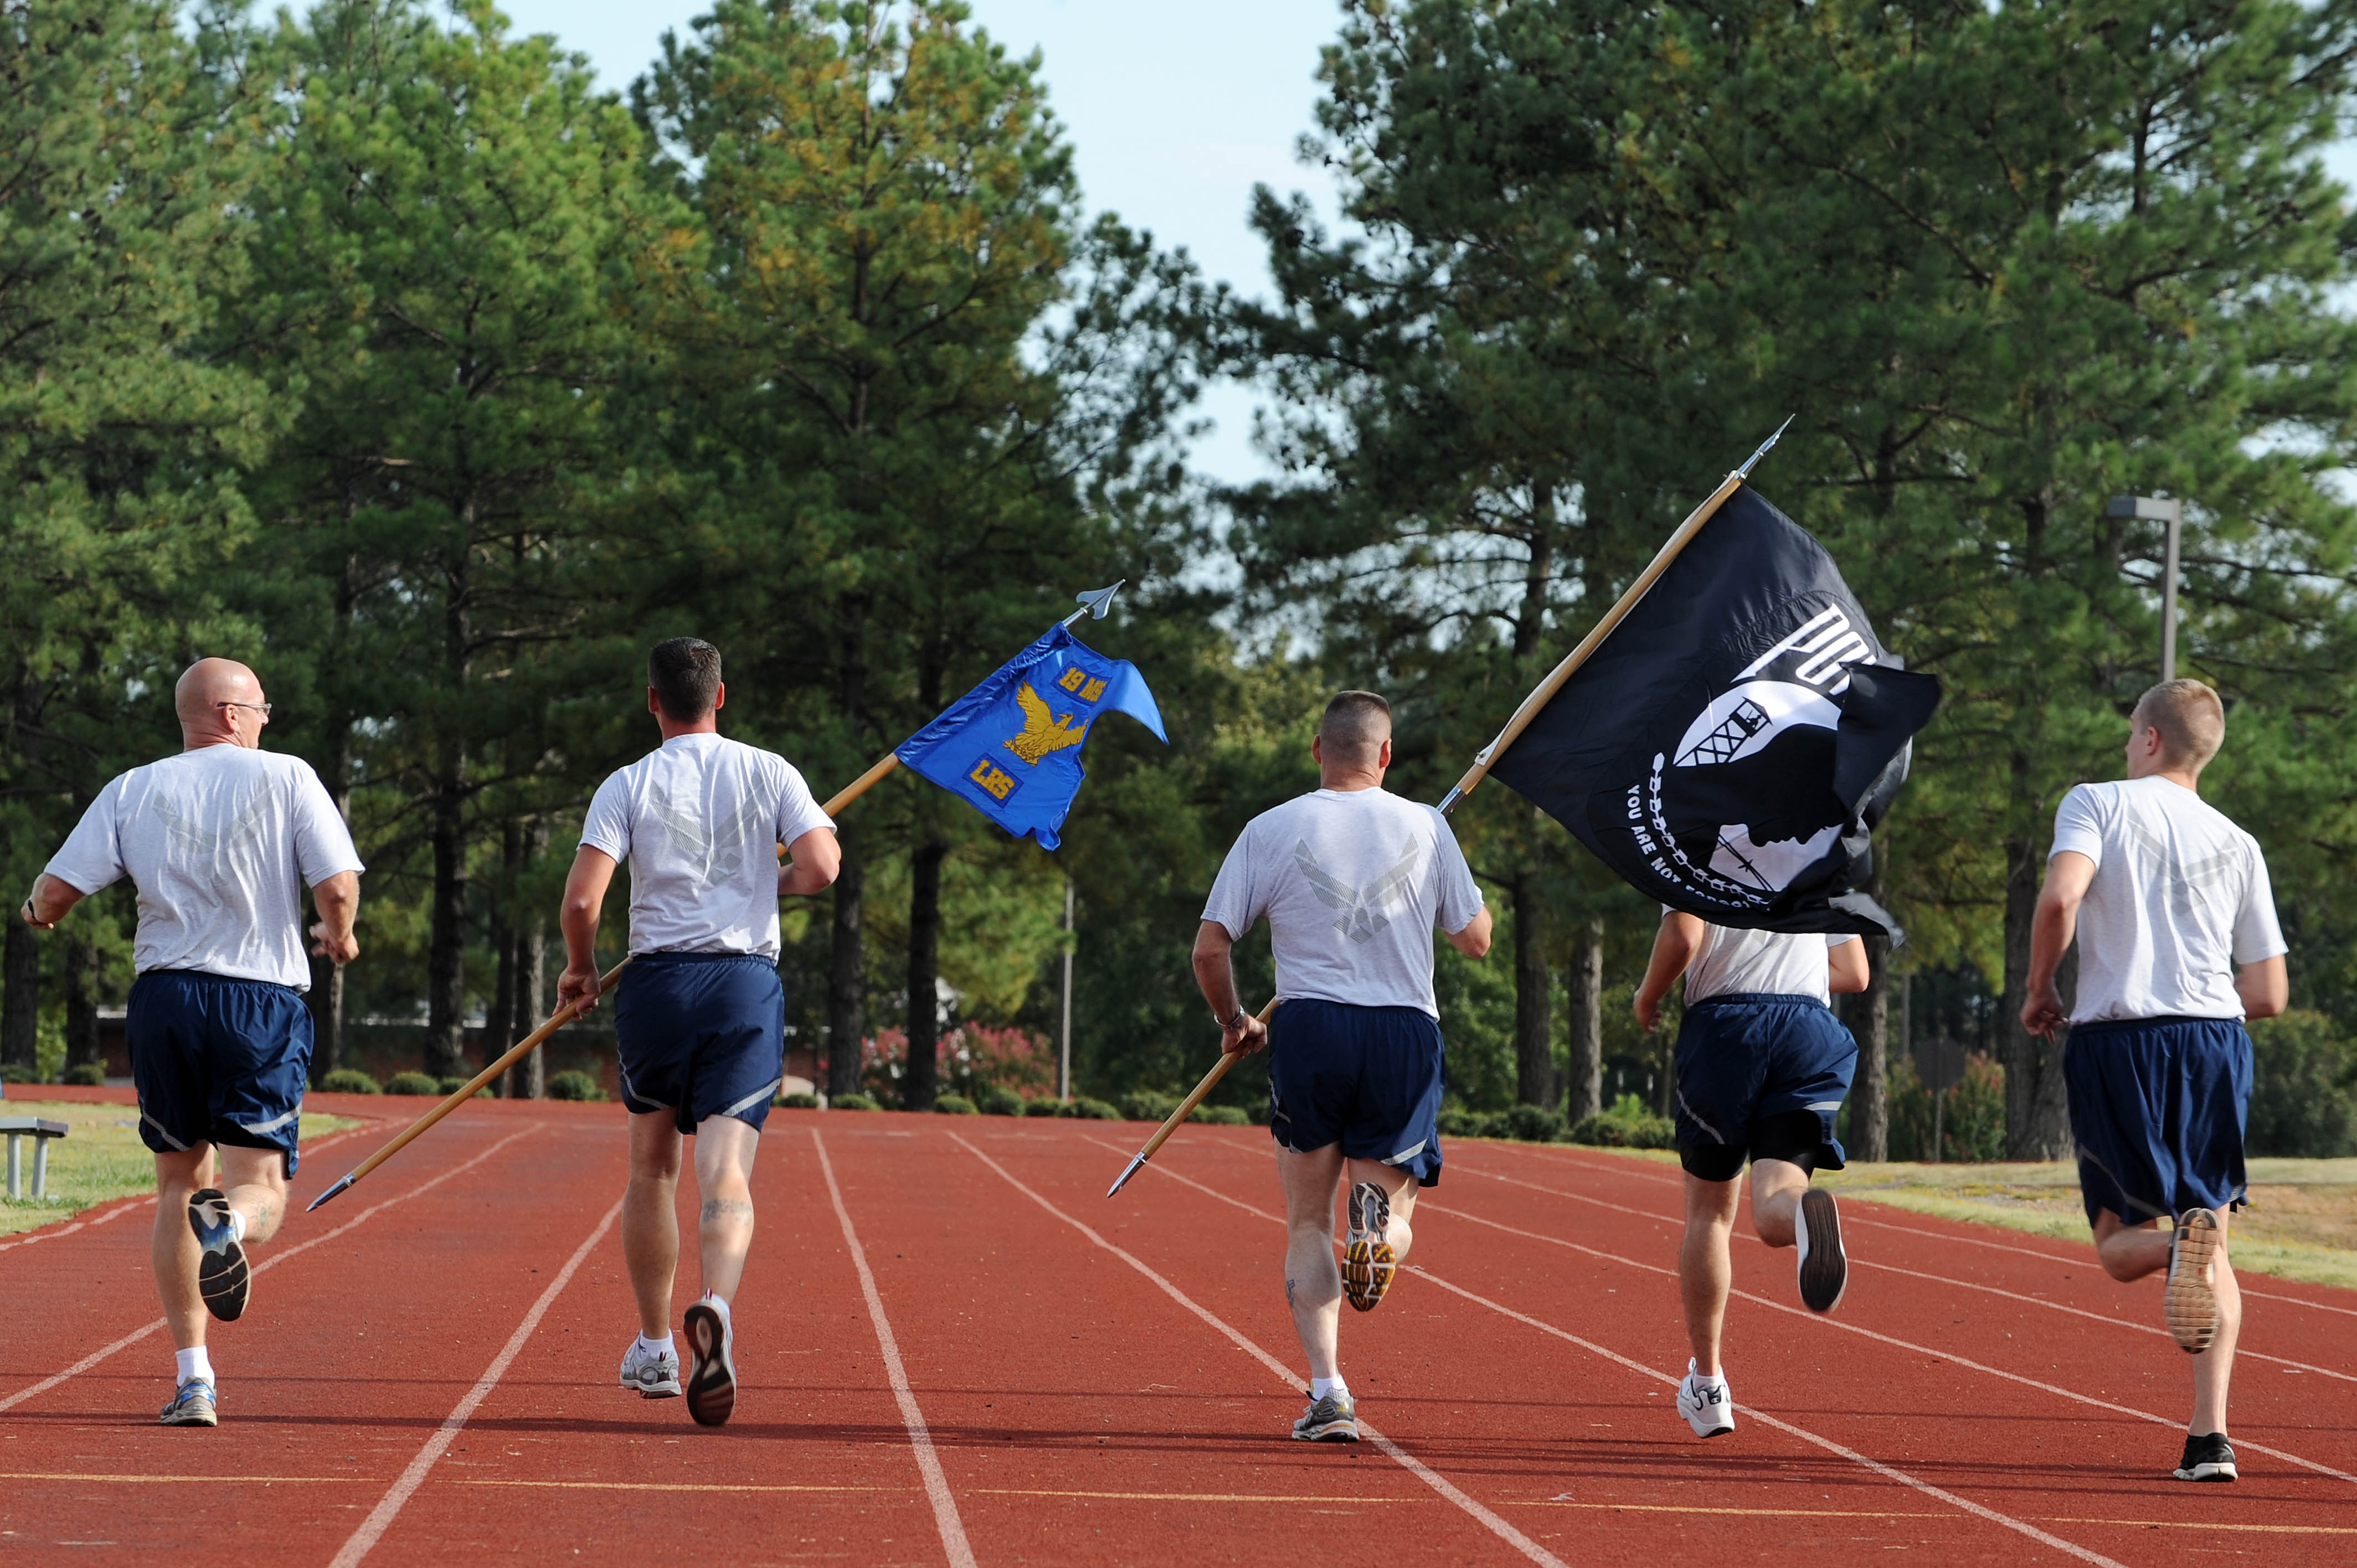 Airmen from the 19th Logistics Readiness Squadron kick off the National Prisoner of War/Missing in Action Remembrance run Sept. 16, 2011, at Little Rock Air Force Base, Ark. The remembrance run is held for 24 hours with the purpose of creating unity among squadrons, as well as raising awareness of the sacrifices of past service members. (U.S. Air Force photo by Staff Sgt. Jim Araos)